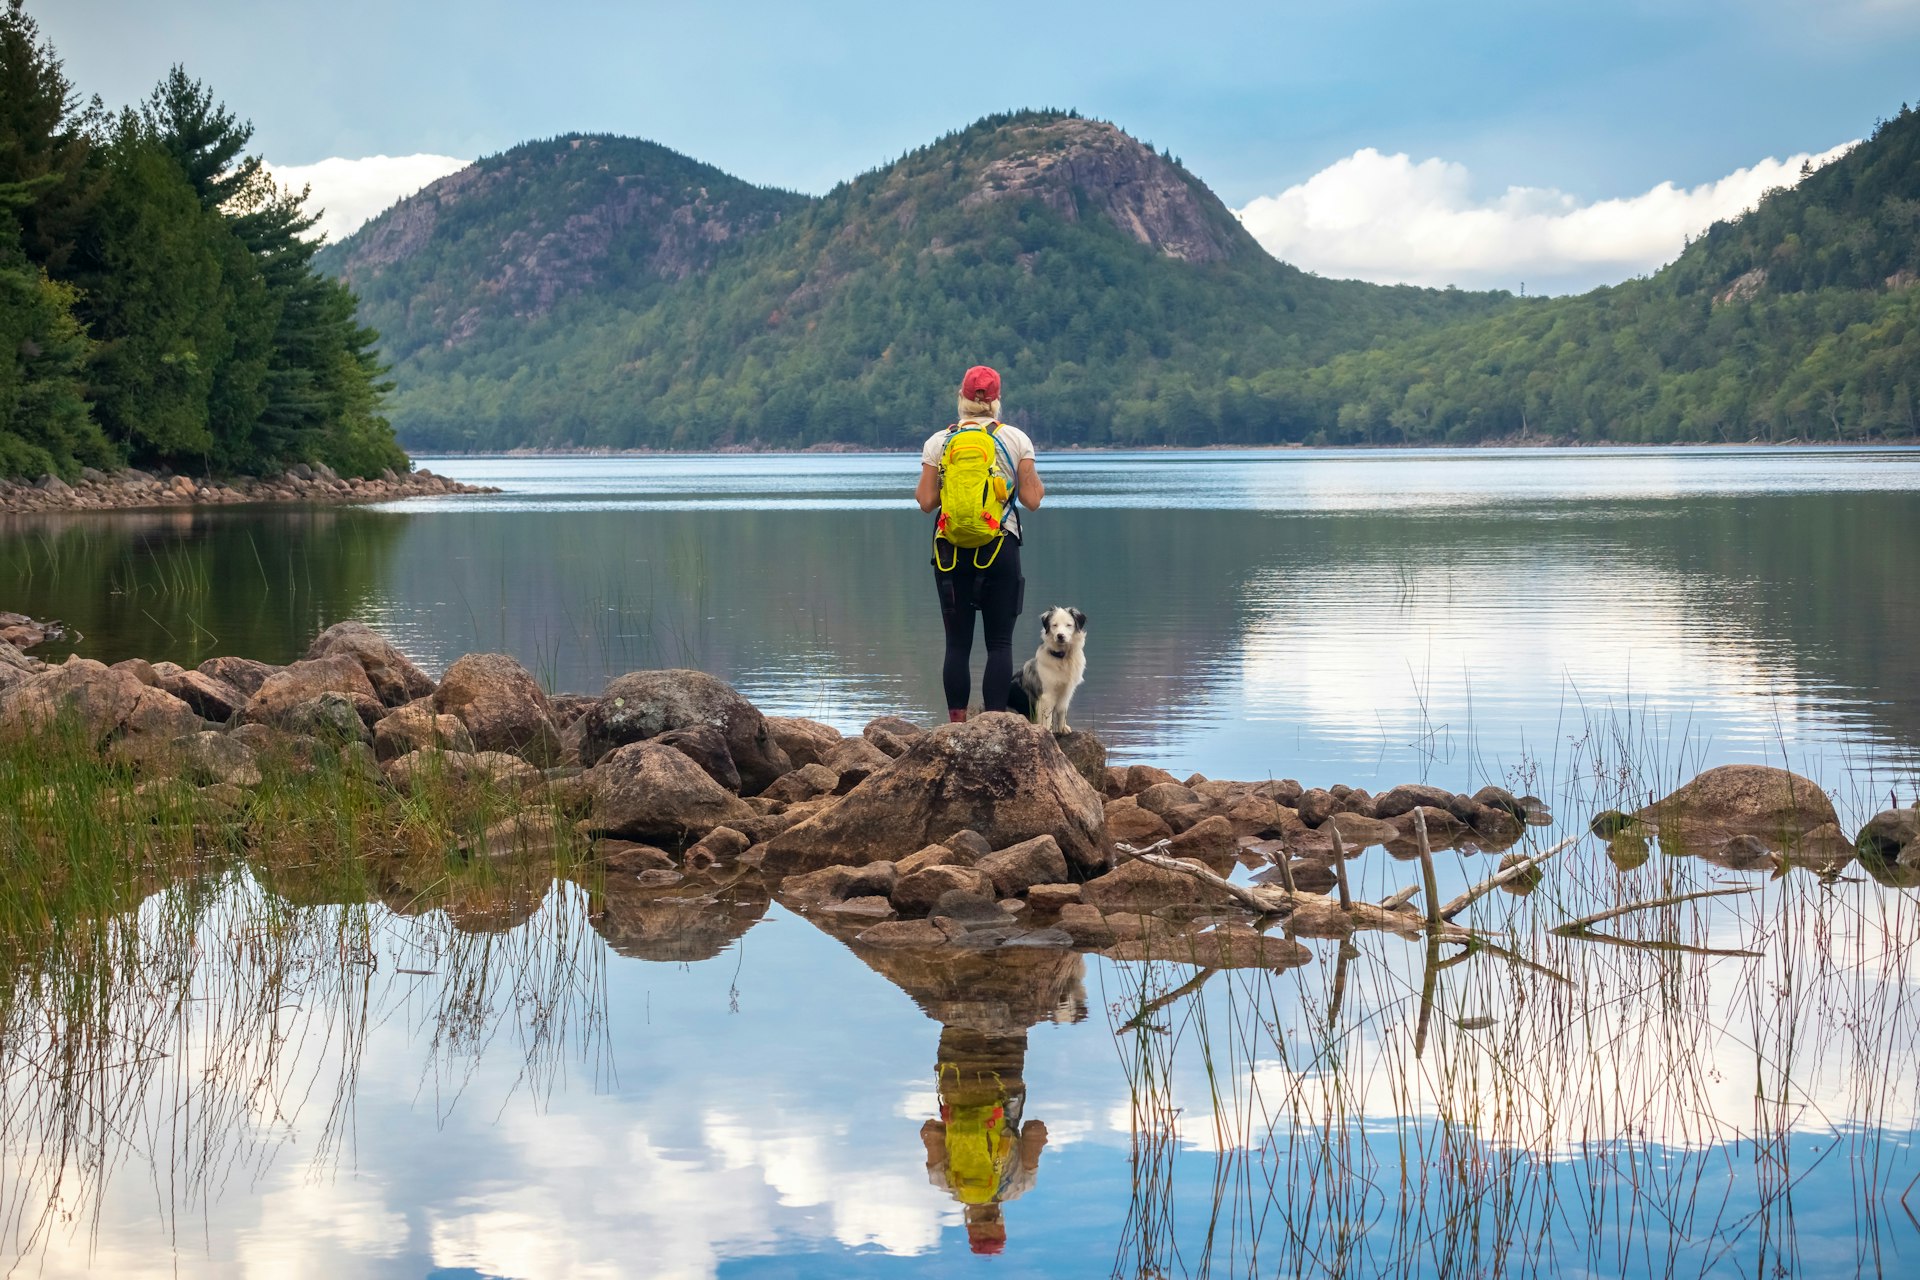 A hikers stands with her dog looking out at a view over a lake